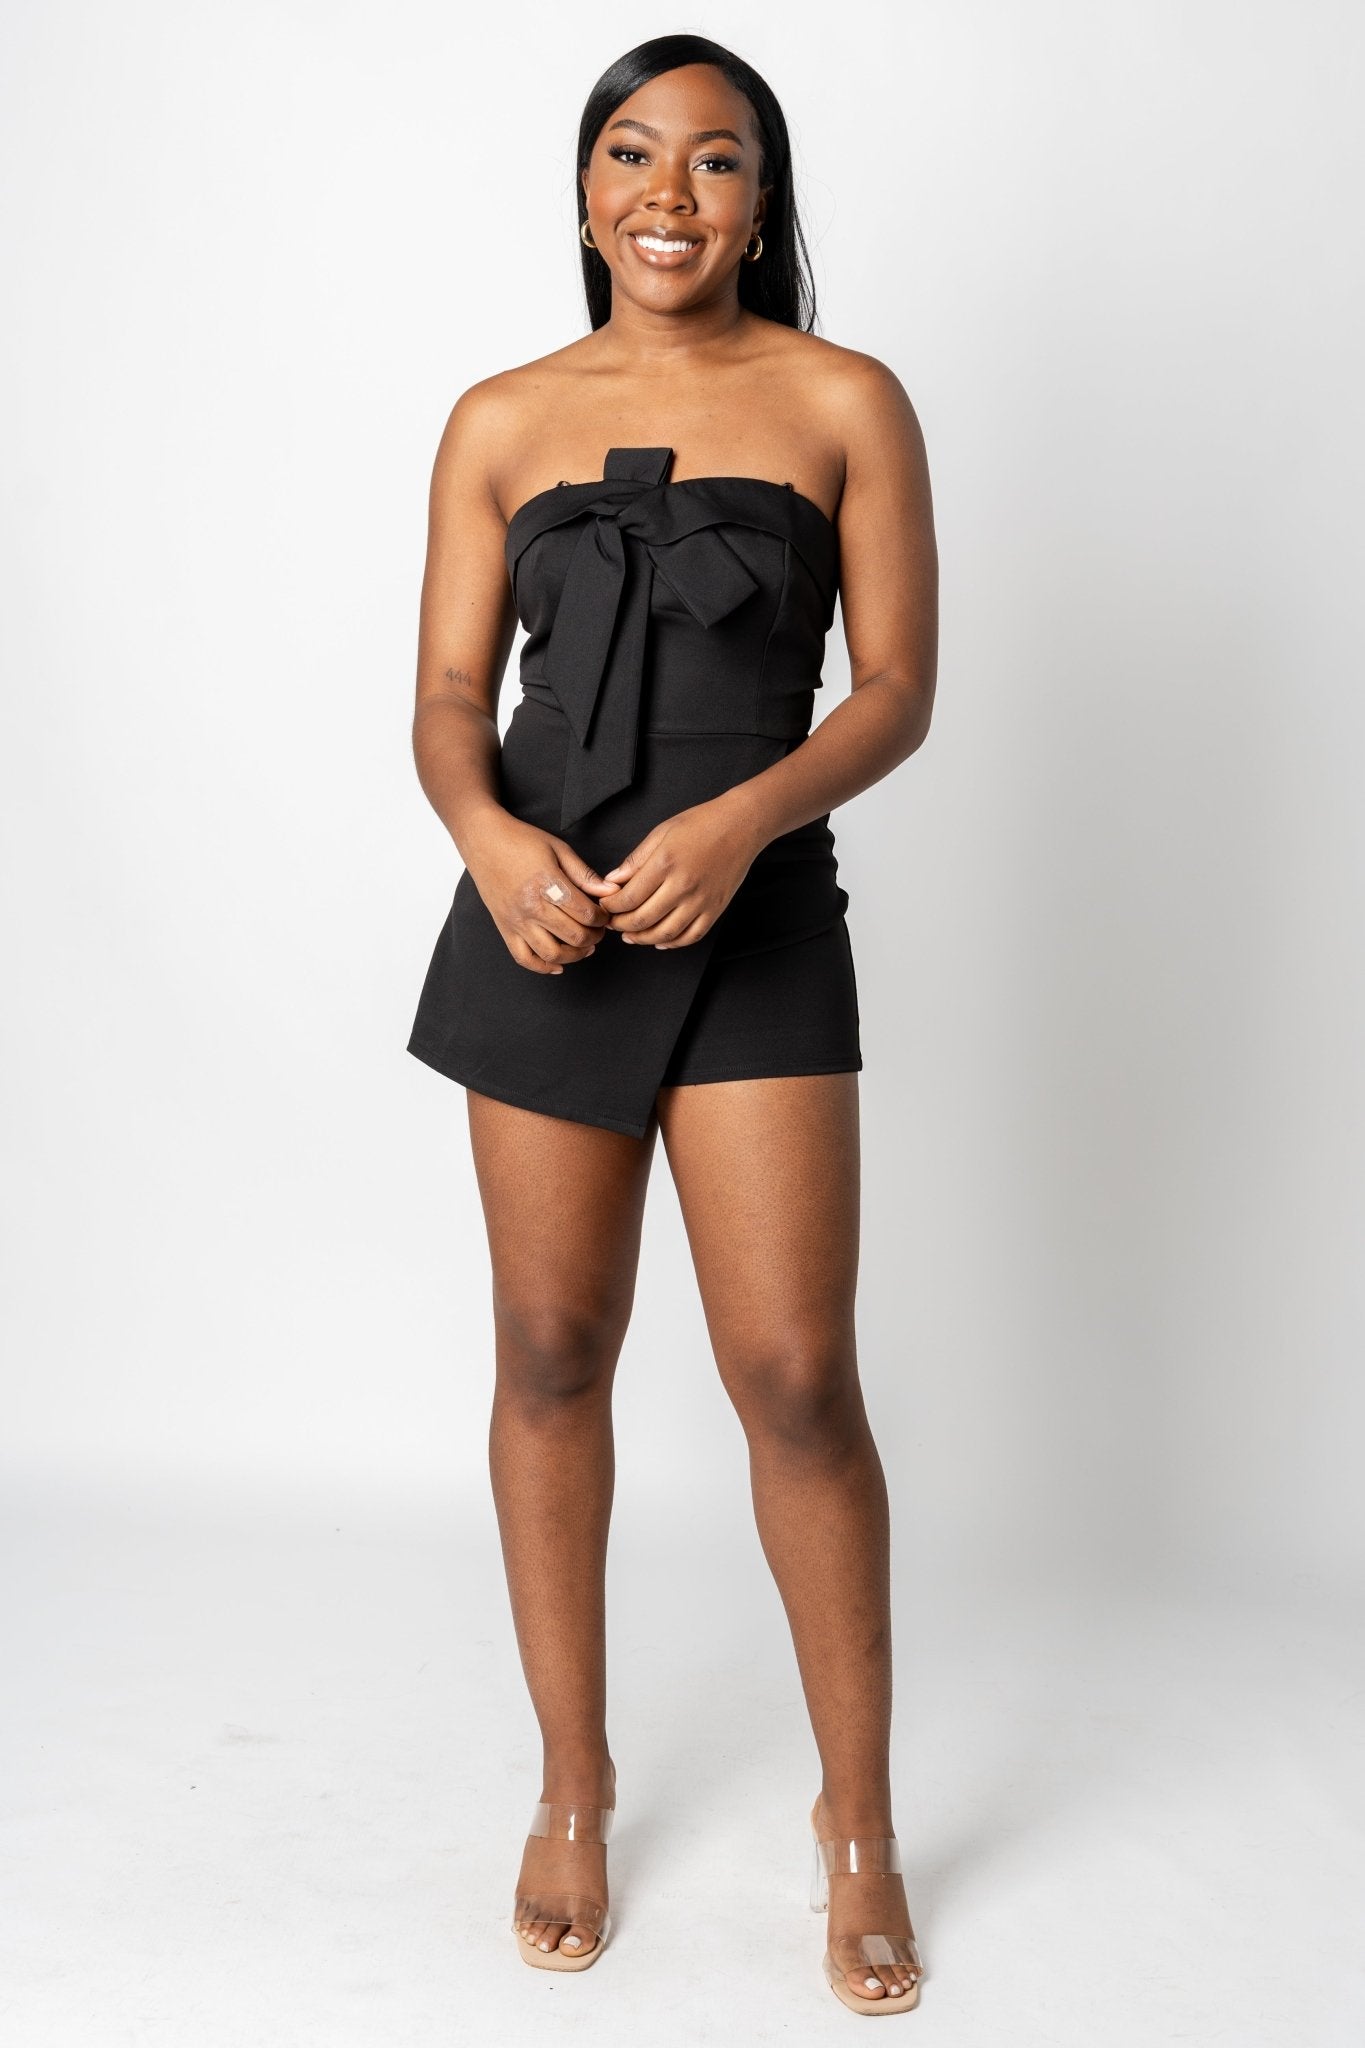 Bow front romper black - Stylish Romper - Trendy Staycation Outfits at Lush Fashion Lounge Boutique in Oklahoma City